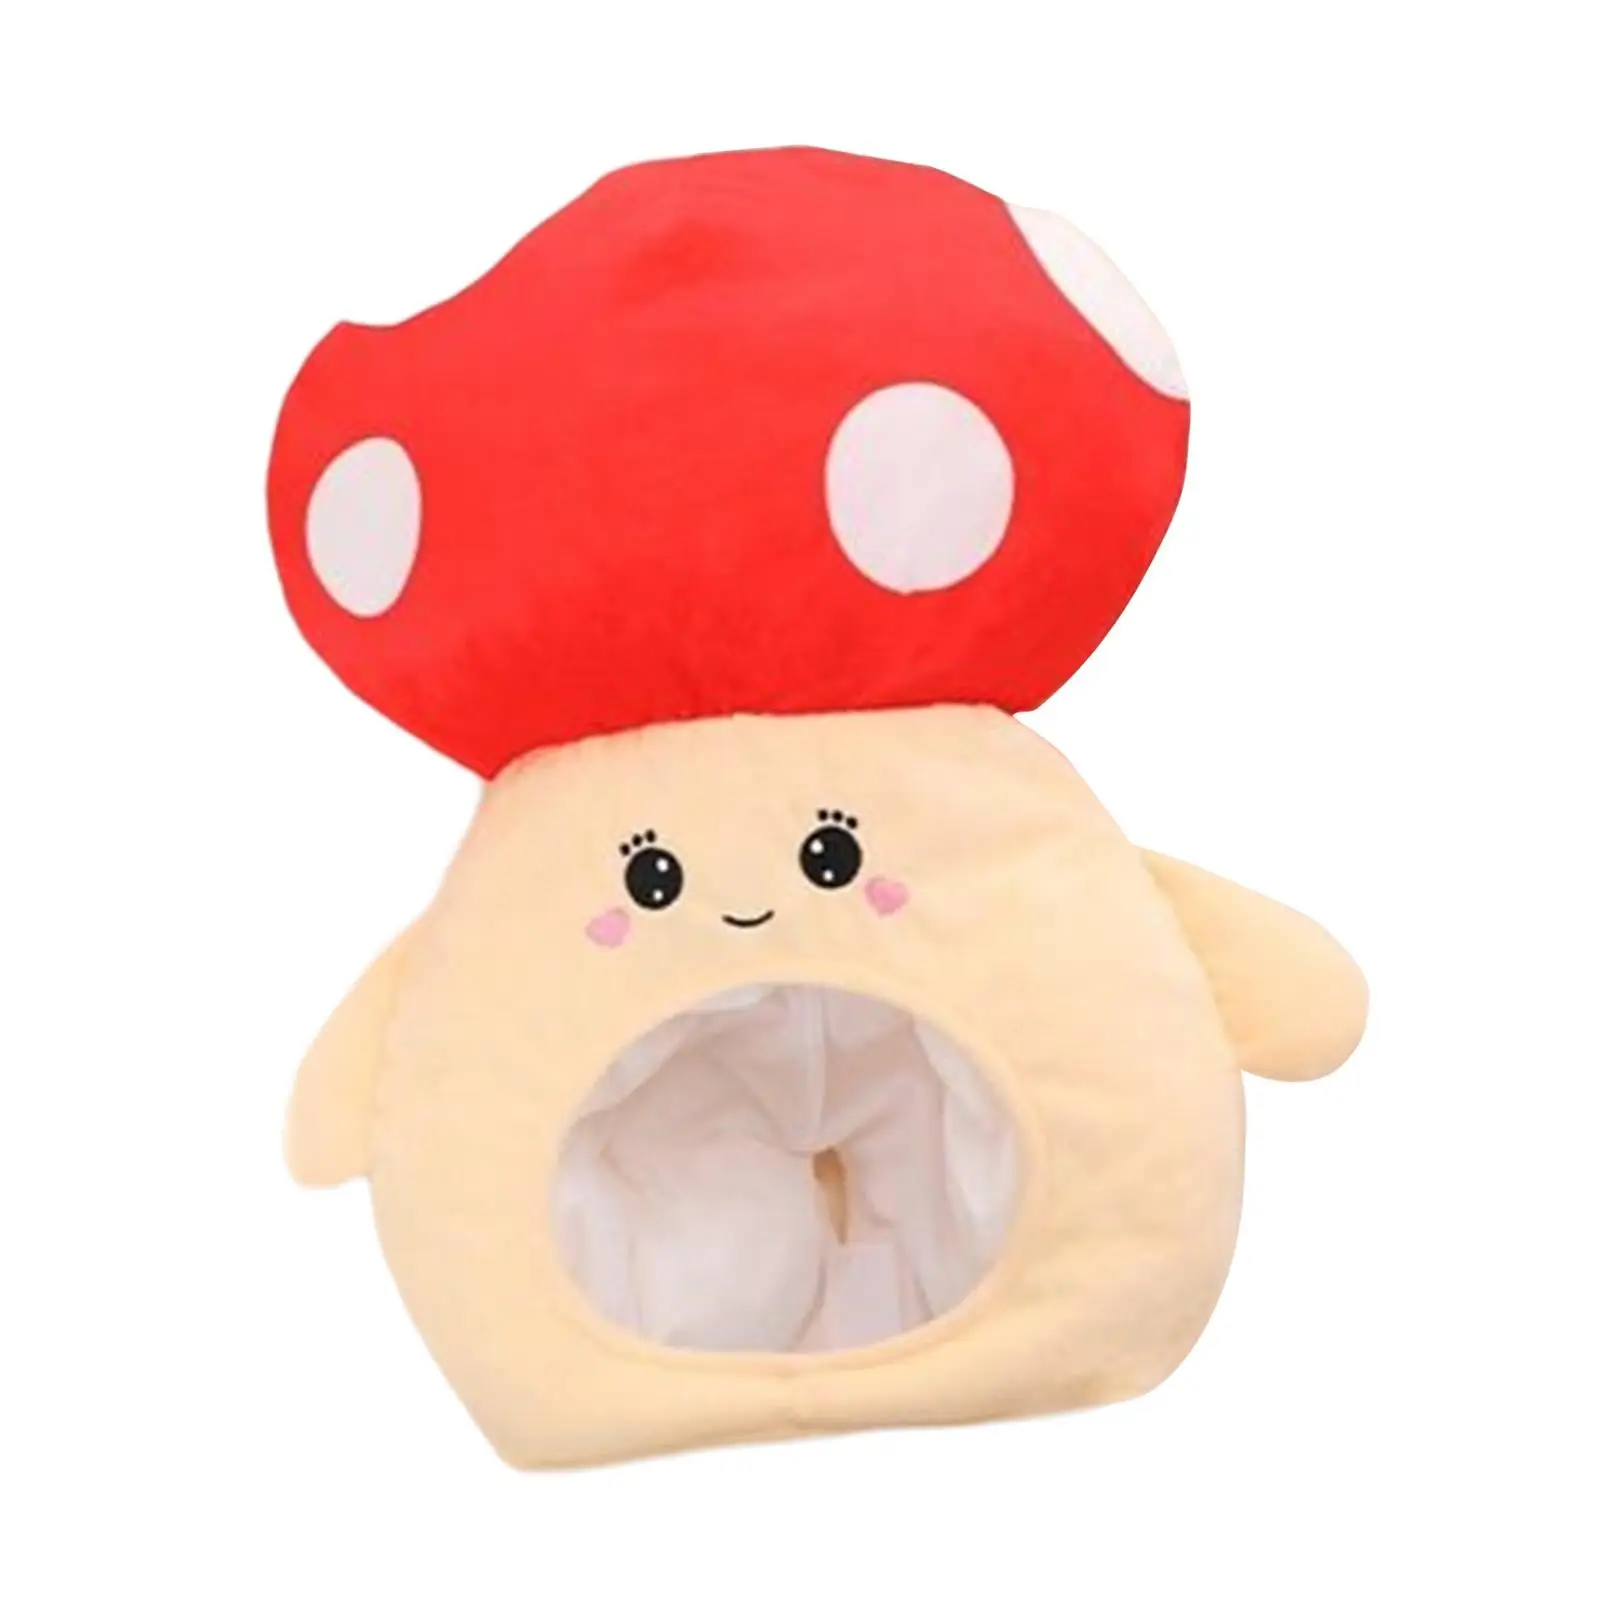 Lovely Plush Mushroom Hat Costume Hats Halloween Stuffed Toy for Carnival Festival Masquerade Stage Performance Dress up Hat